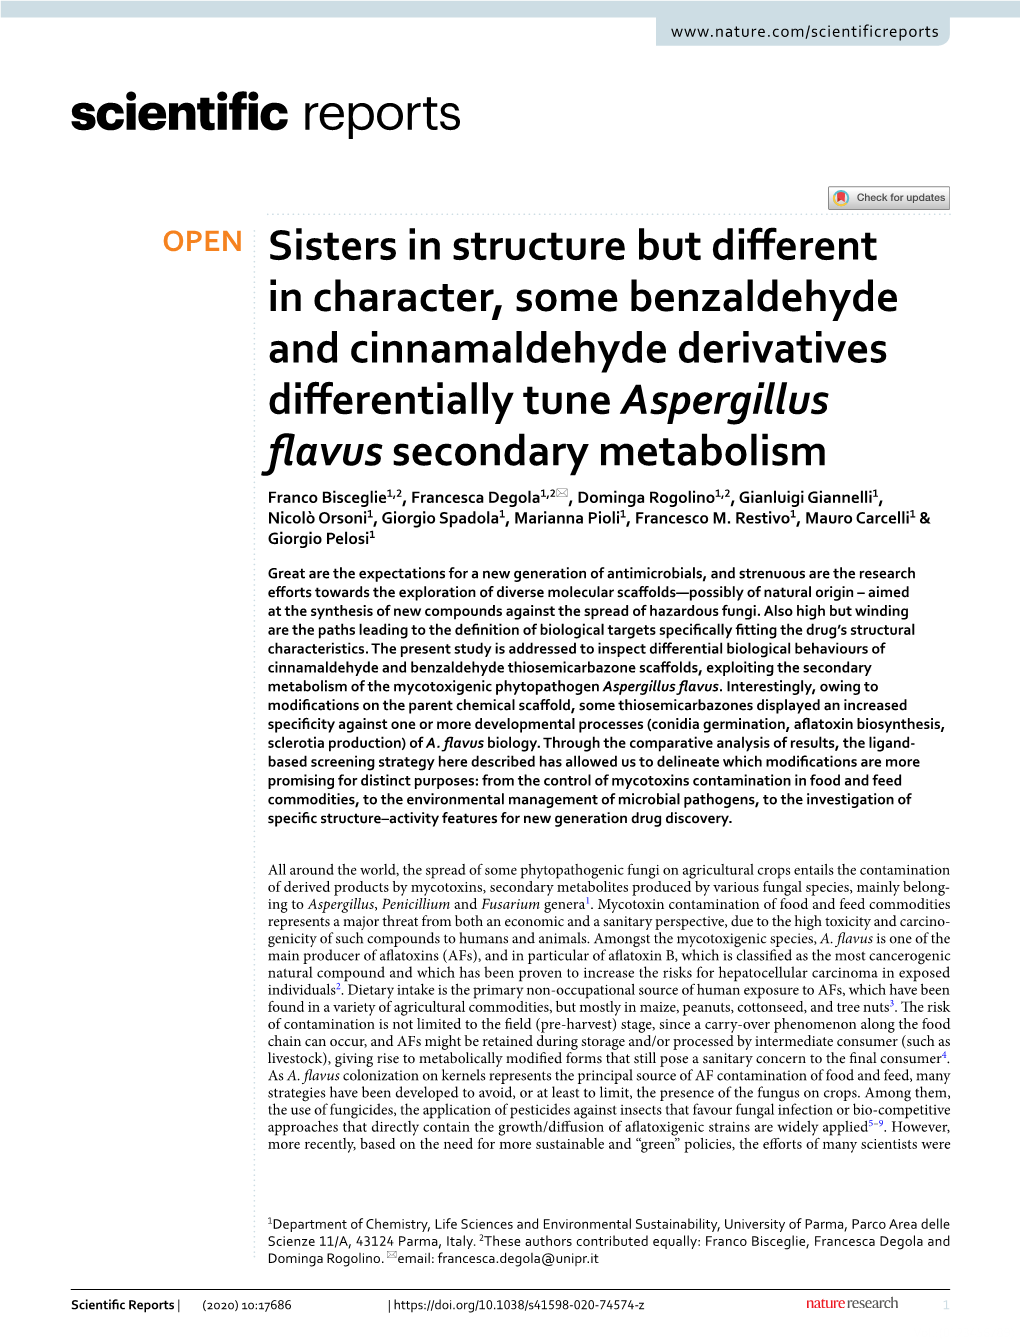 Sisters in Structure but Different in Character, Some Benzaldehyde and Cinnamaldehyde Derivatives Differentially Tune Aspergillu